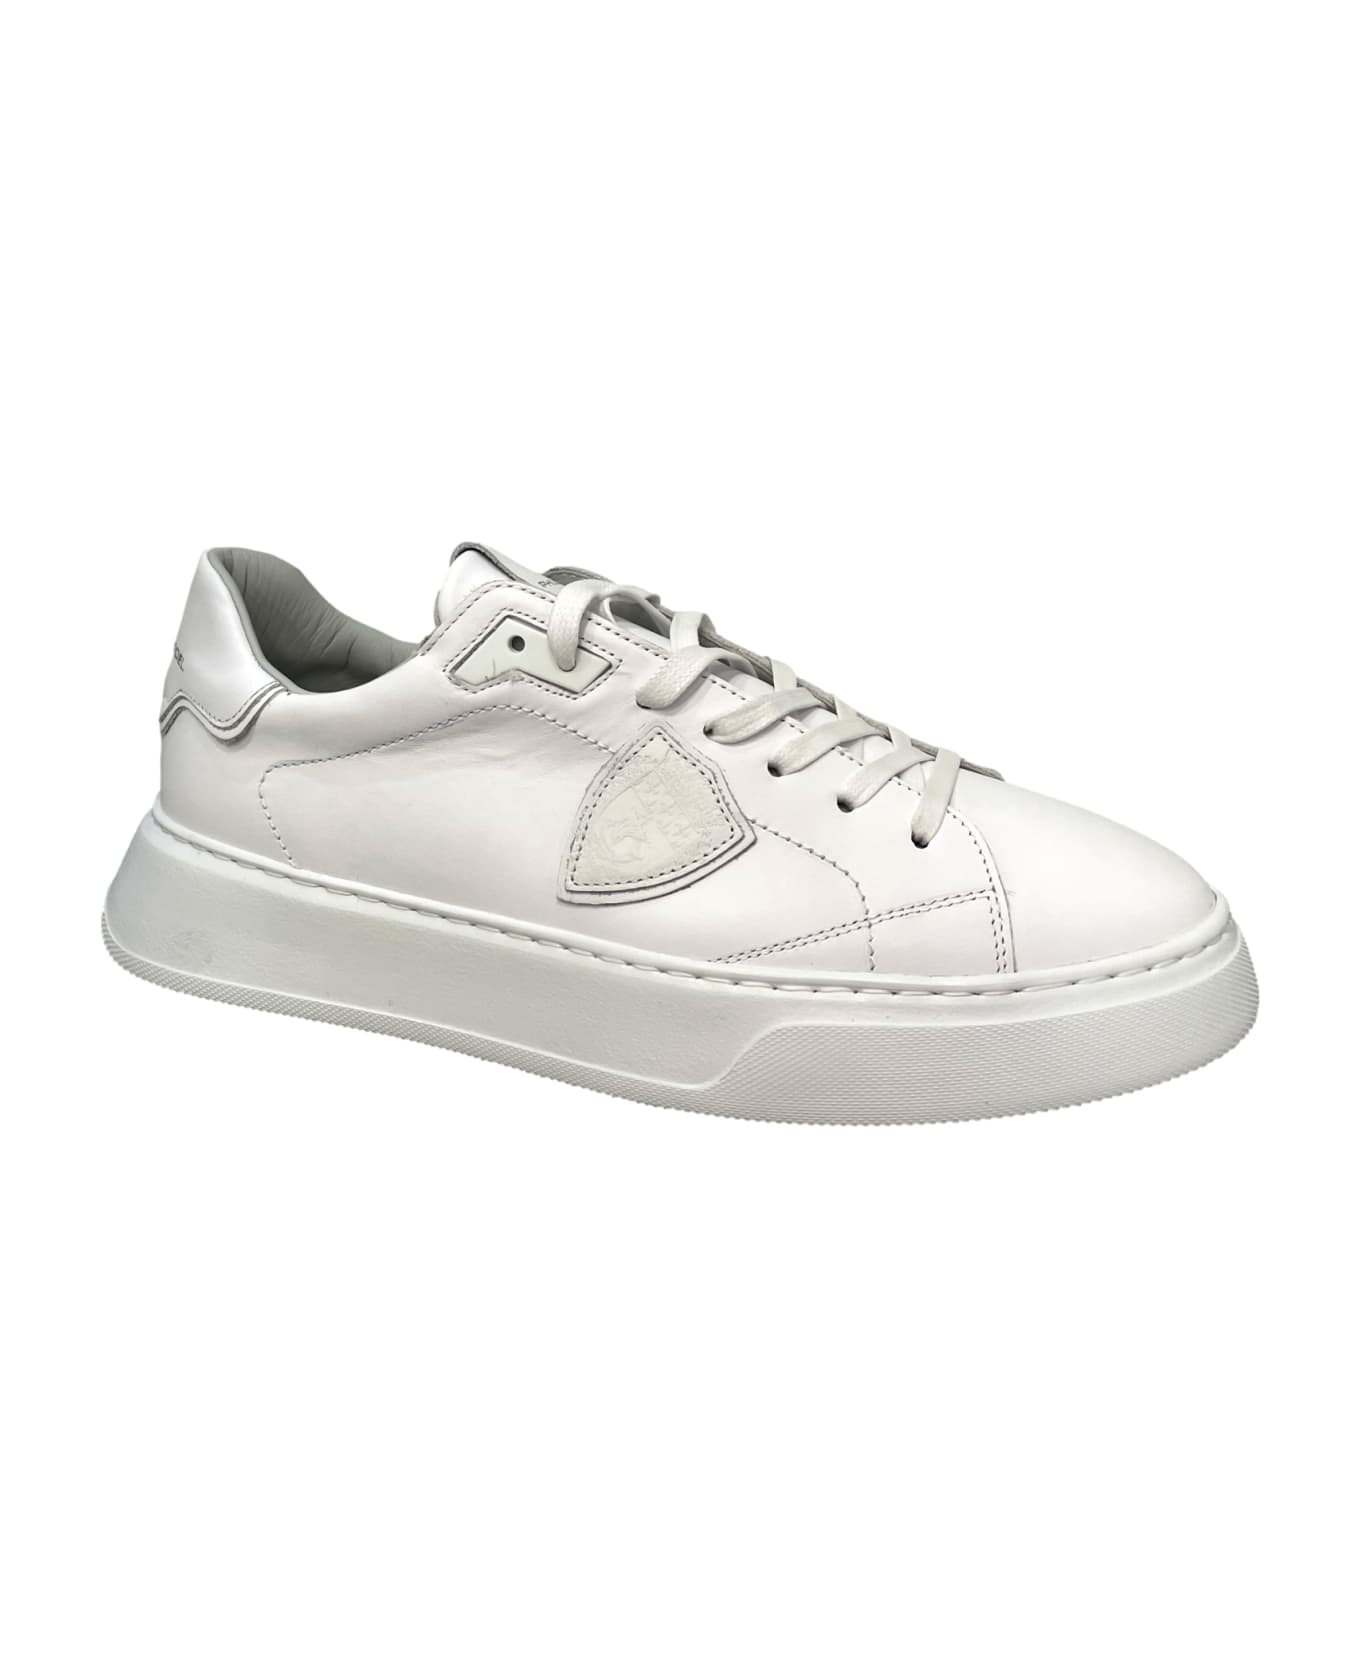 Philippe Model Temple Sneackers - White